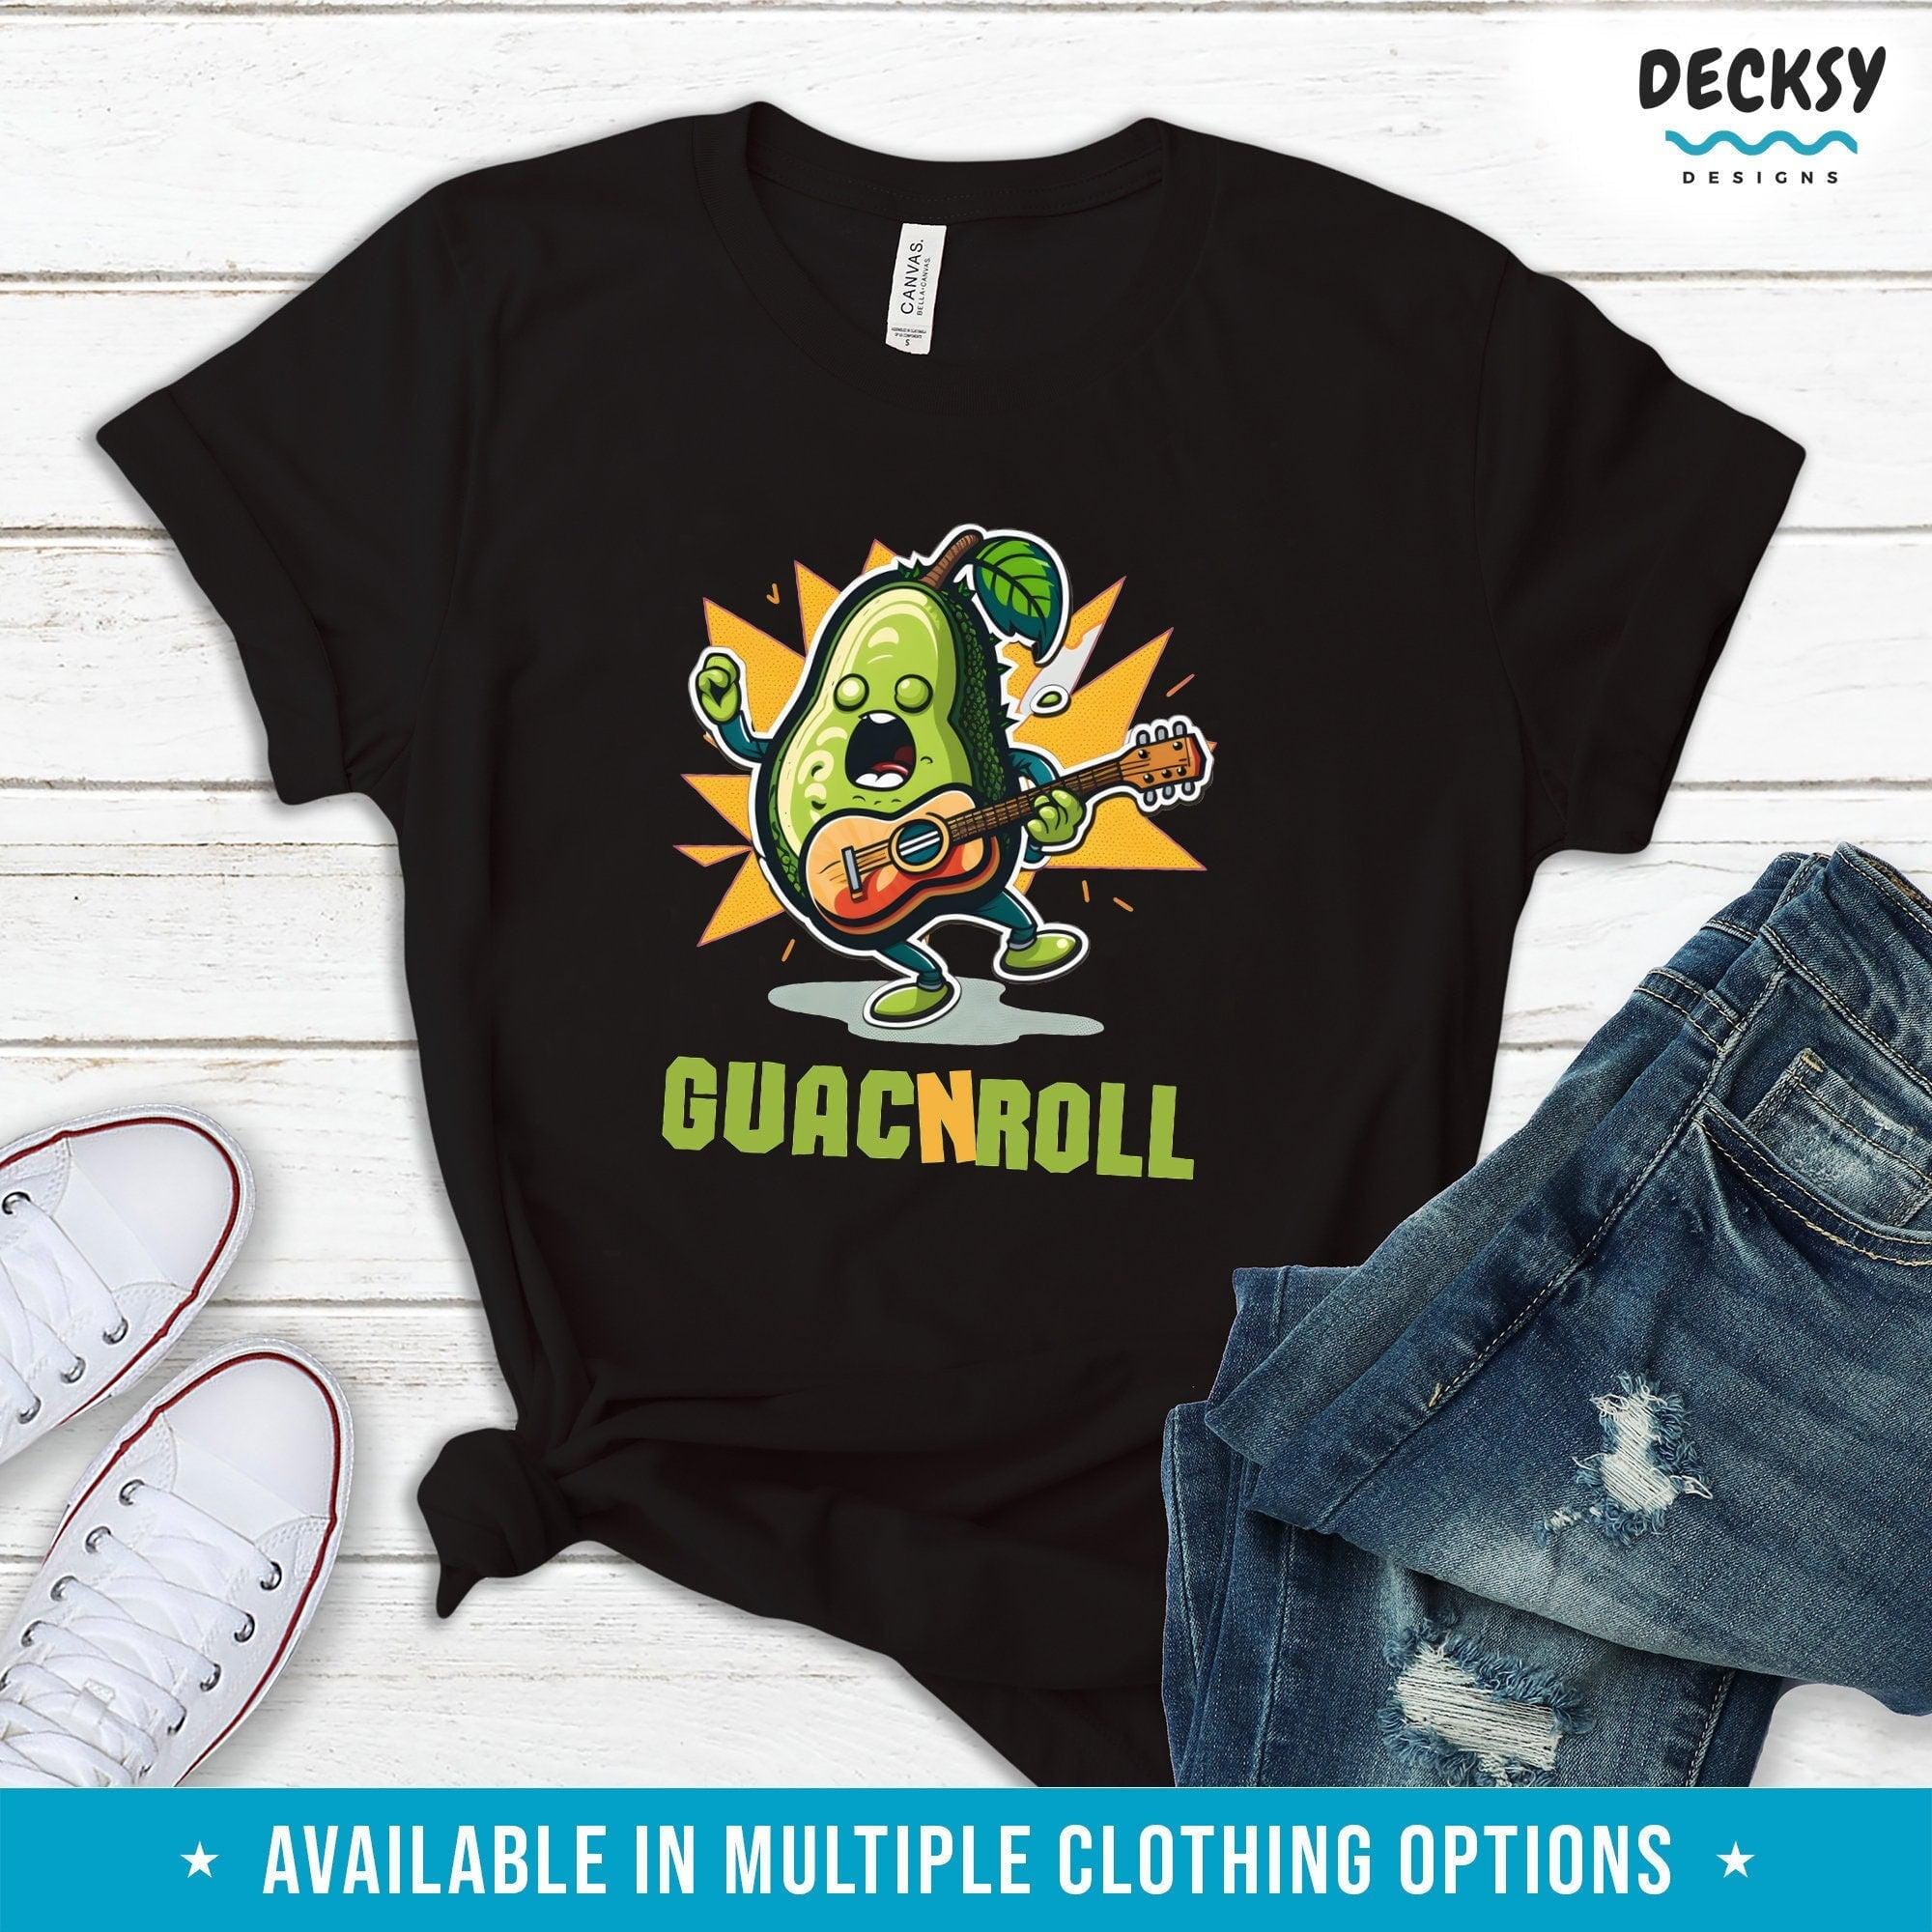 Funny Avocado Shirt, Gift for Avocado Lover-Clothing:Gender-Neutral Adult Clothing:Tops & Tees:T-shirts:Graphic Tees-DecksyDesigns